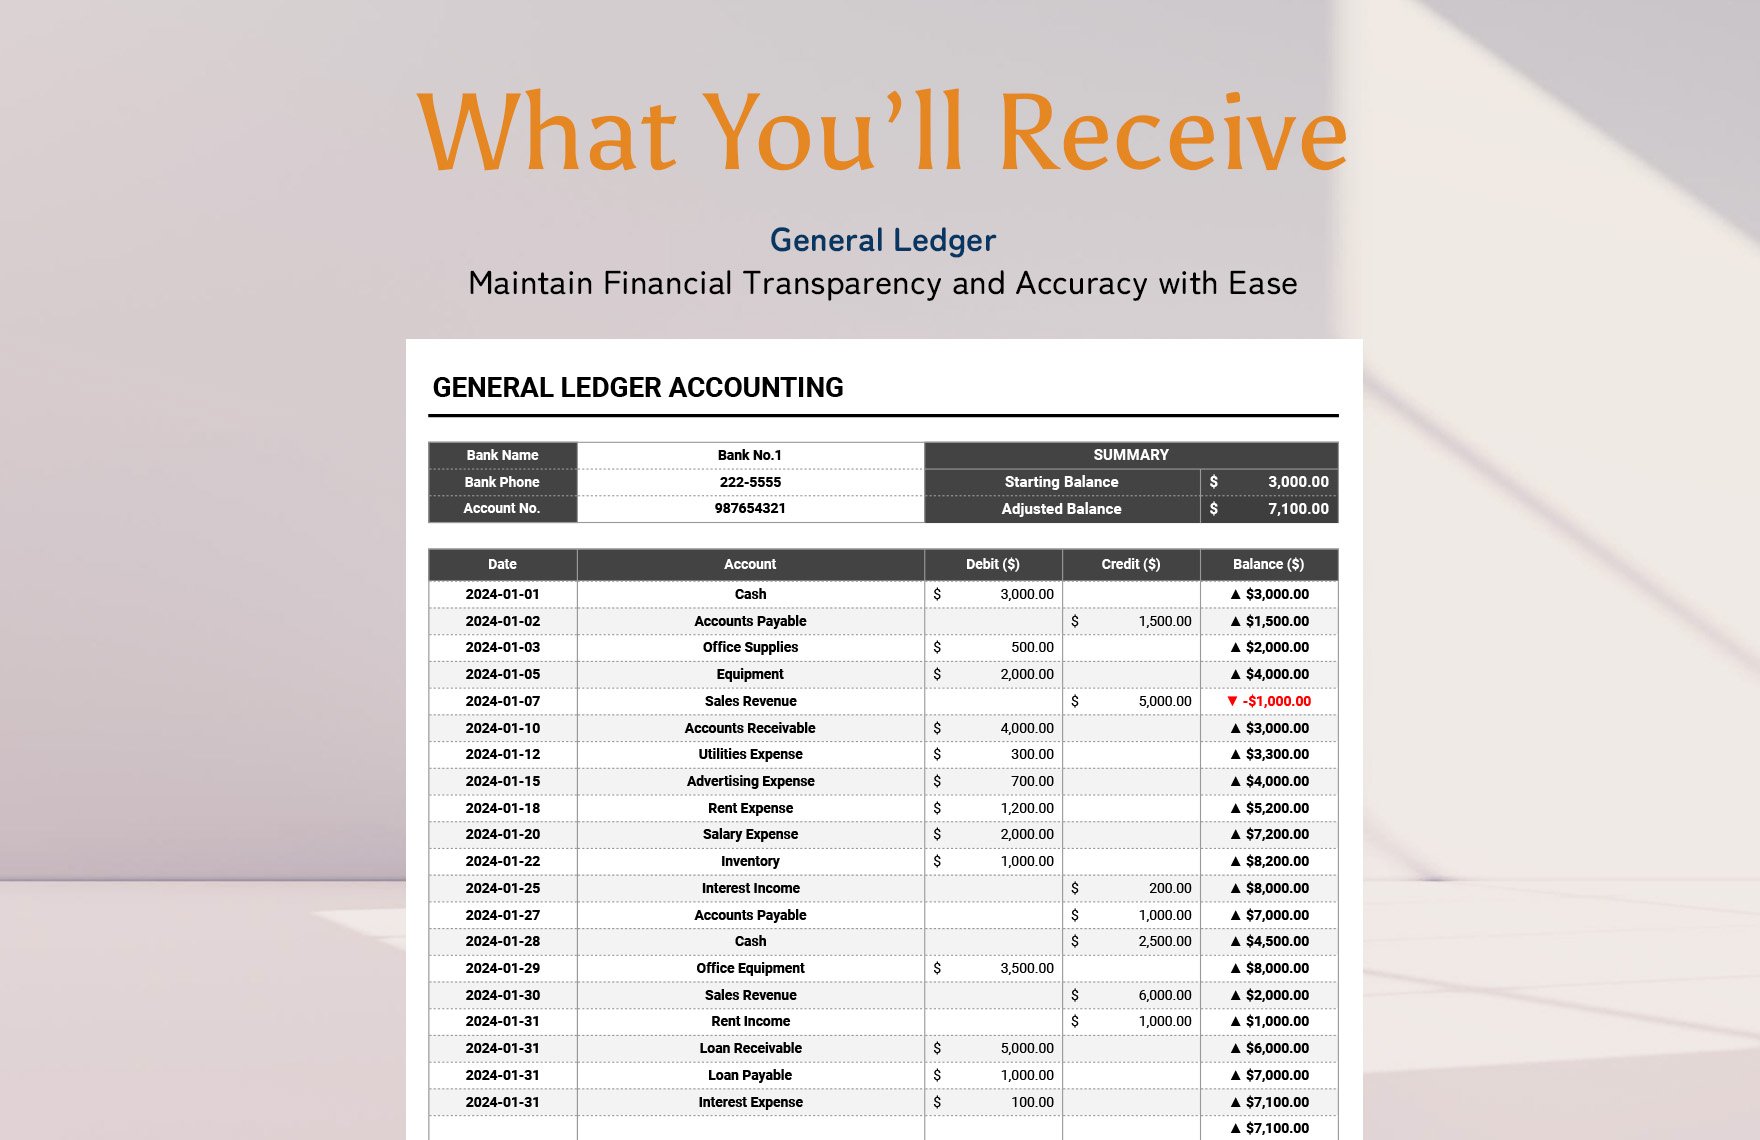 General Ledger Accounting Template